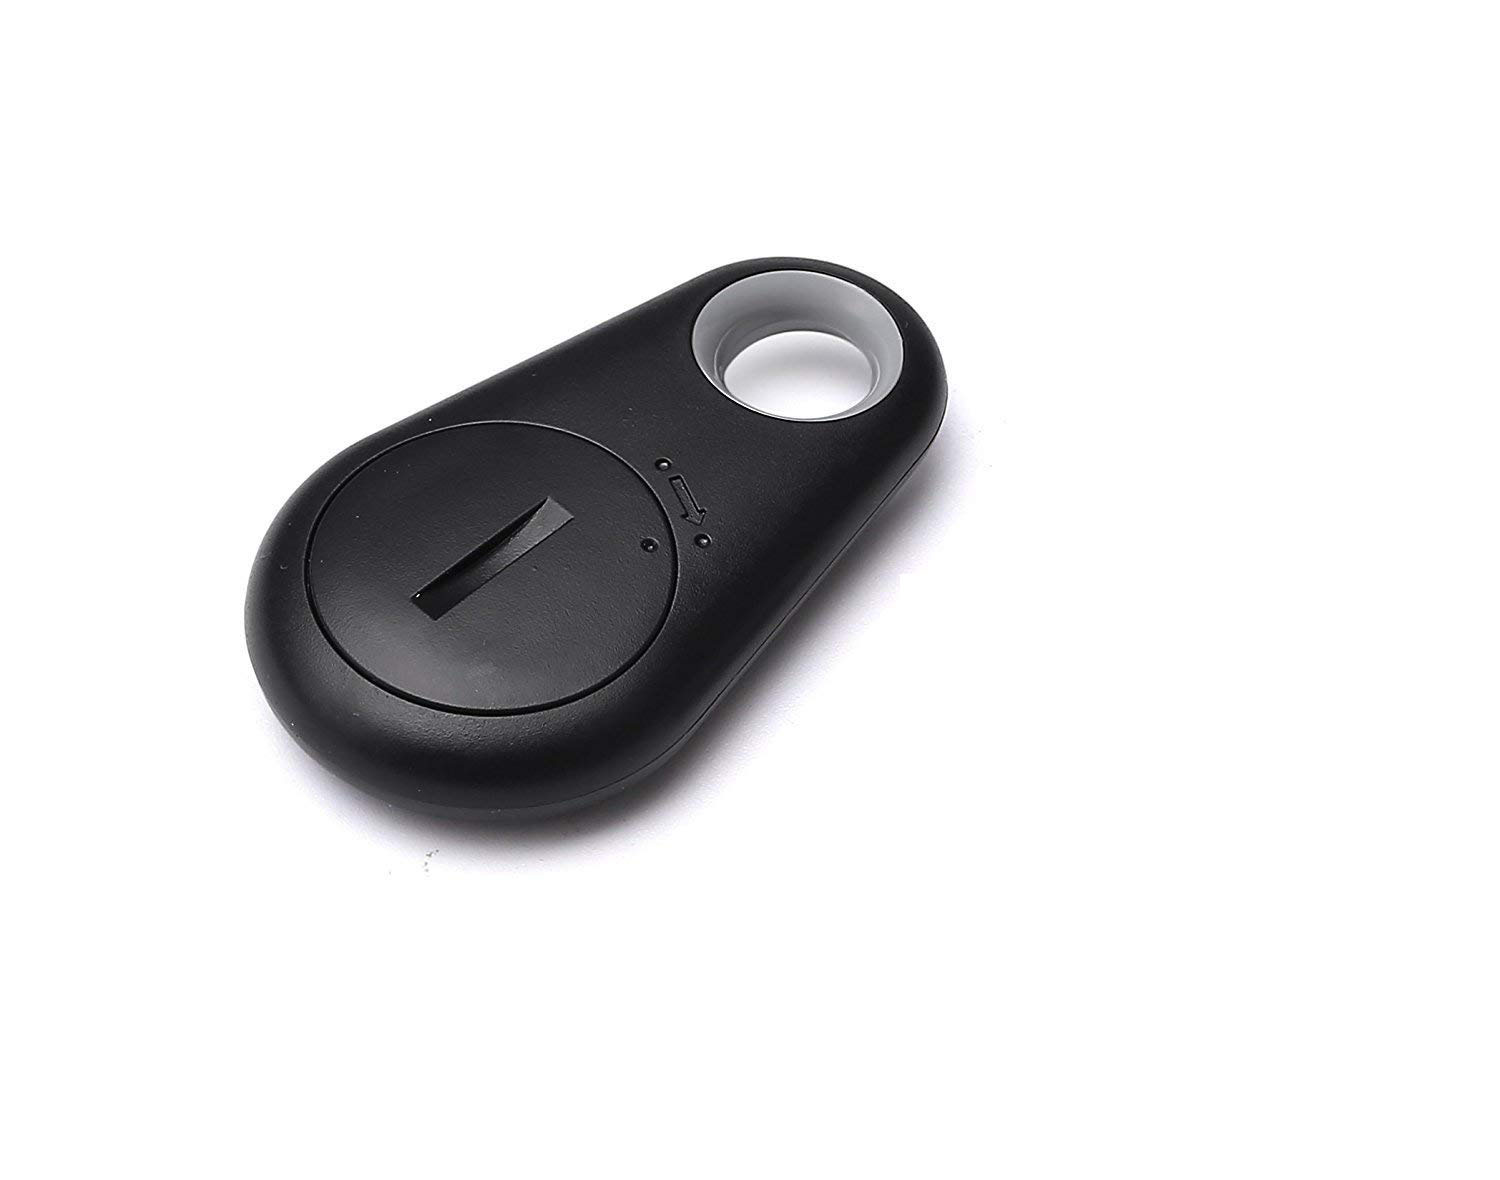 findy your car keys with bluetooth